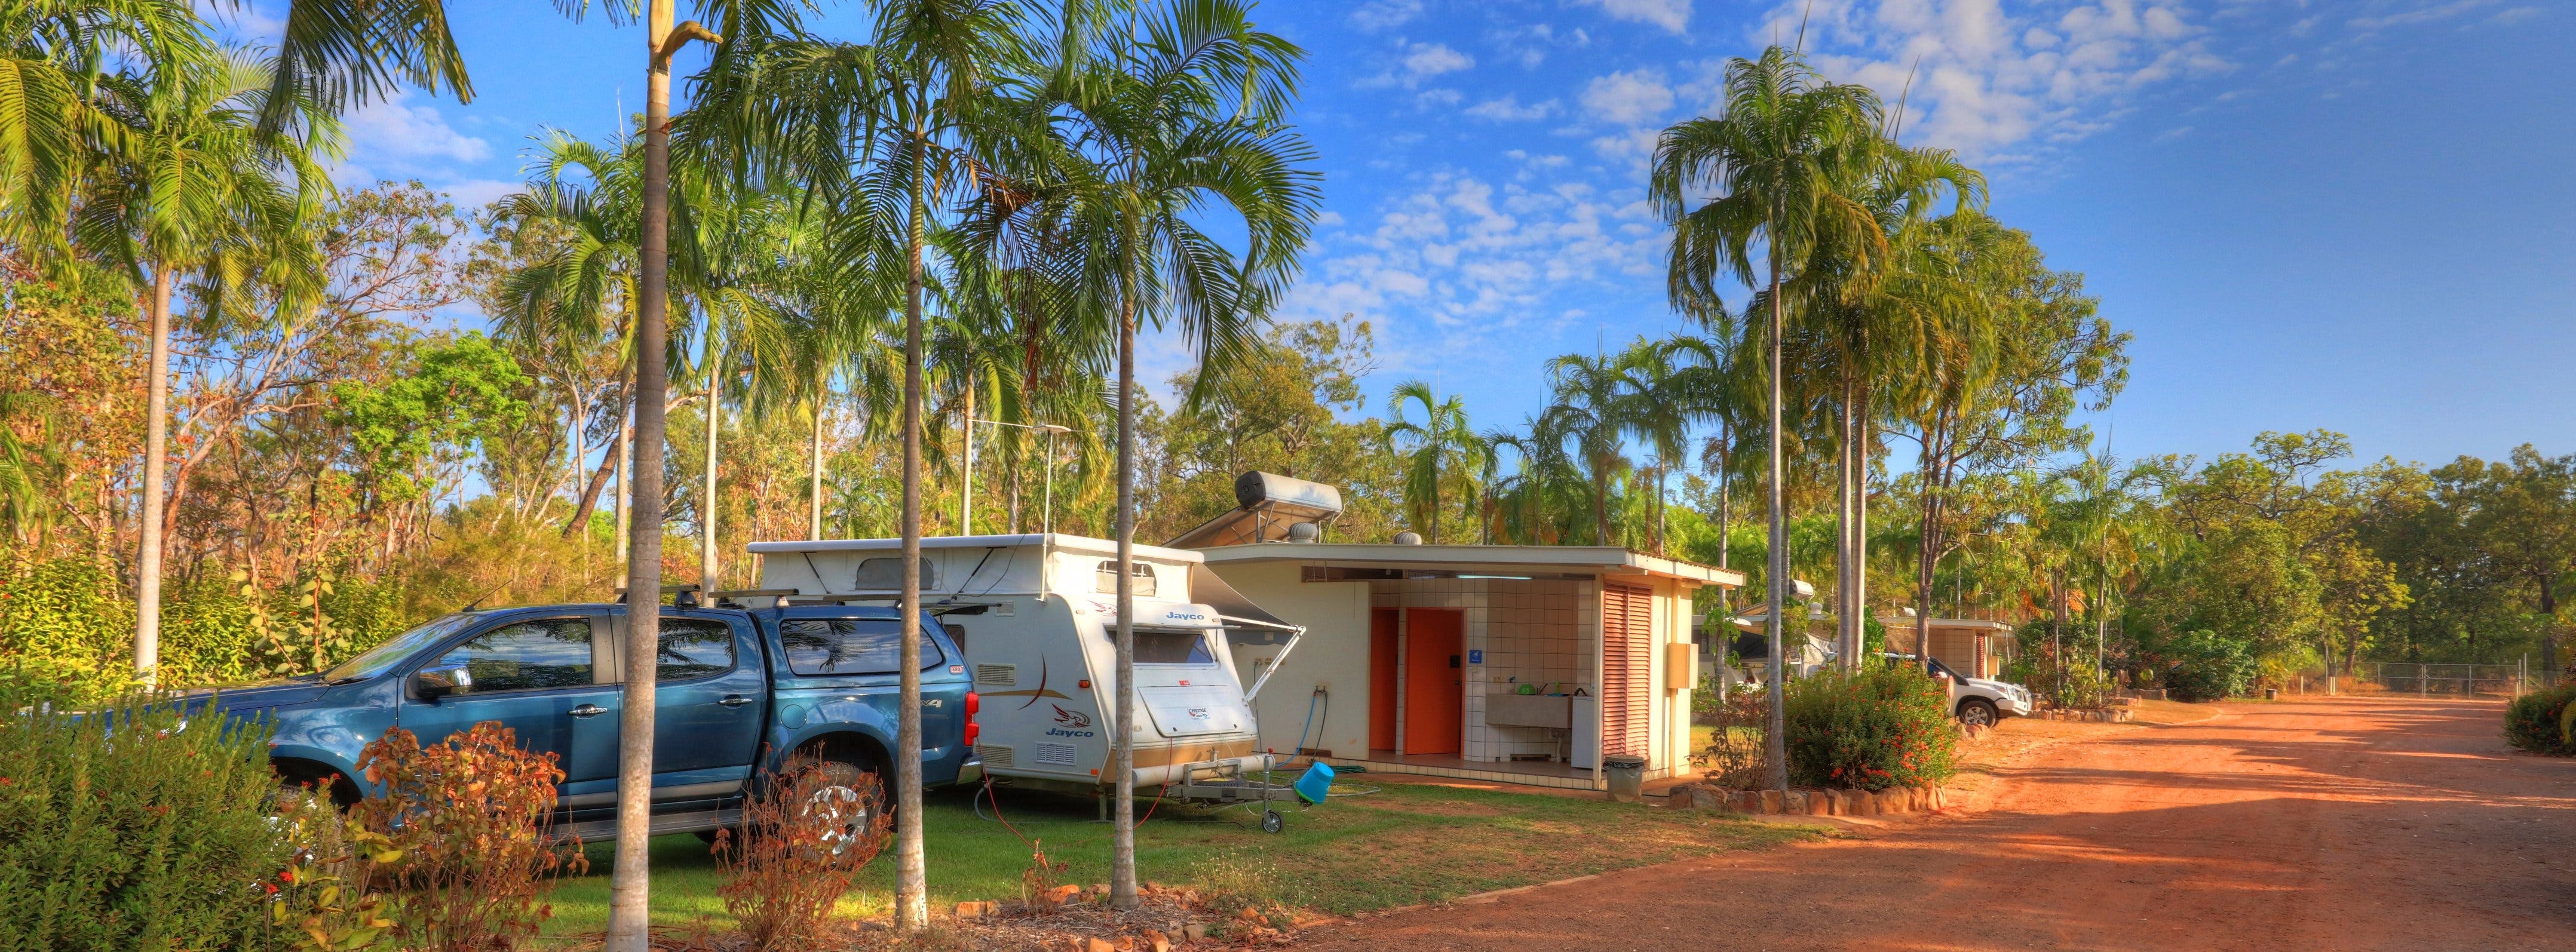 Batchelor Holiday Park - Coogee Beach Accommodation